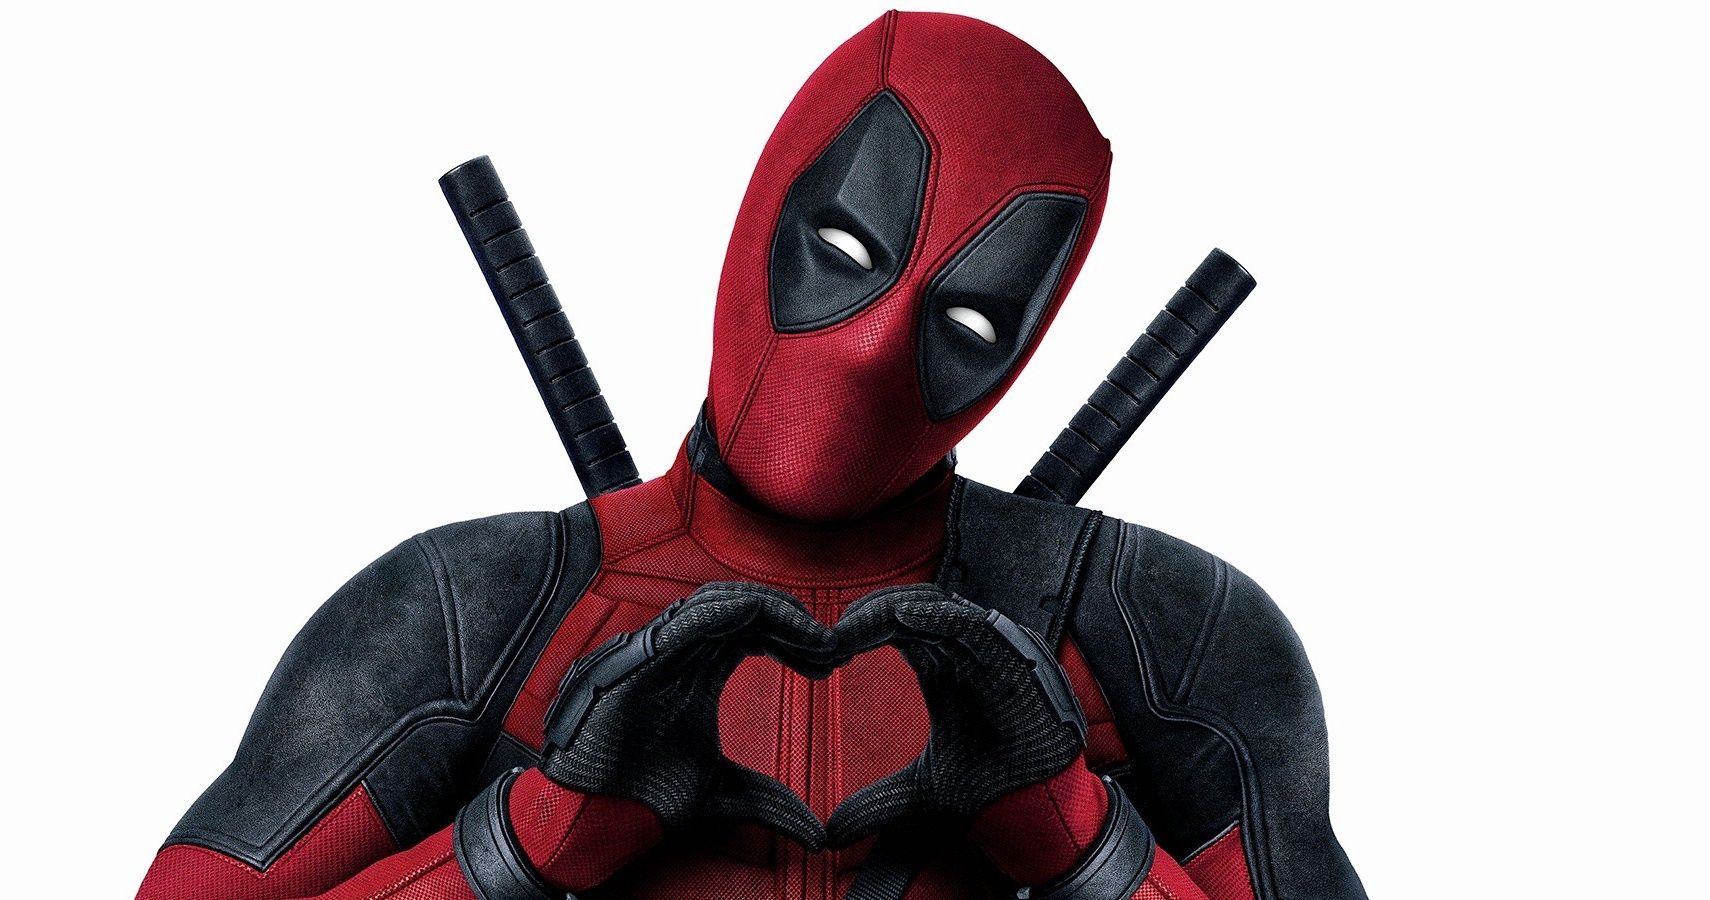 Ryan Reynolds Deadpool making a heart with his hands